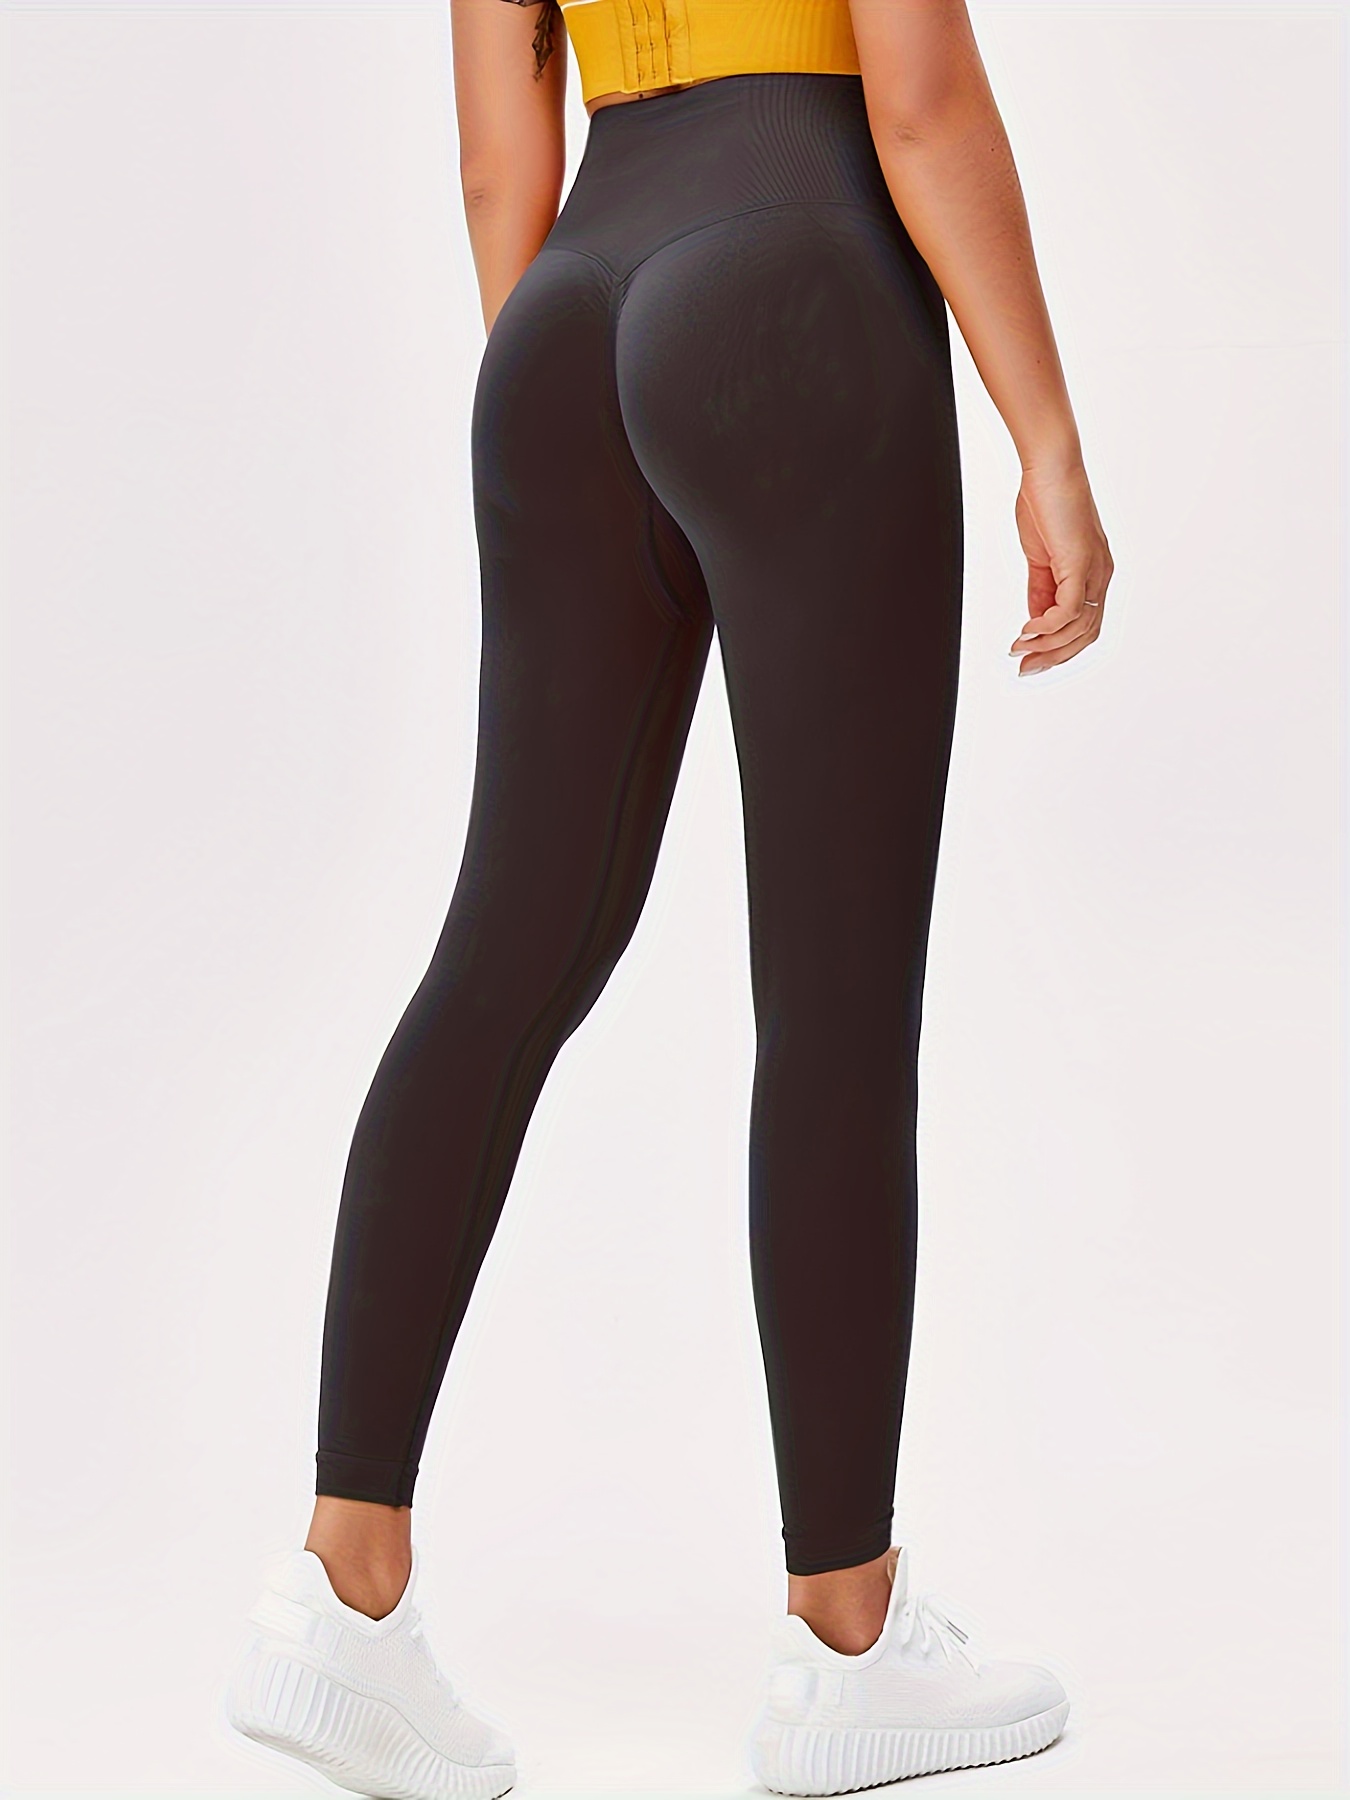 Megacme Workout Seamless Leggings with Pockets for Women High Waisted Gym  Women's Butt Lift Tummy Control Yoga Pants Black at  Women's Clothing  store